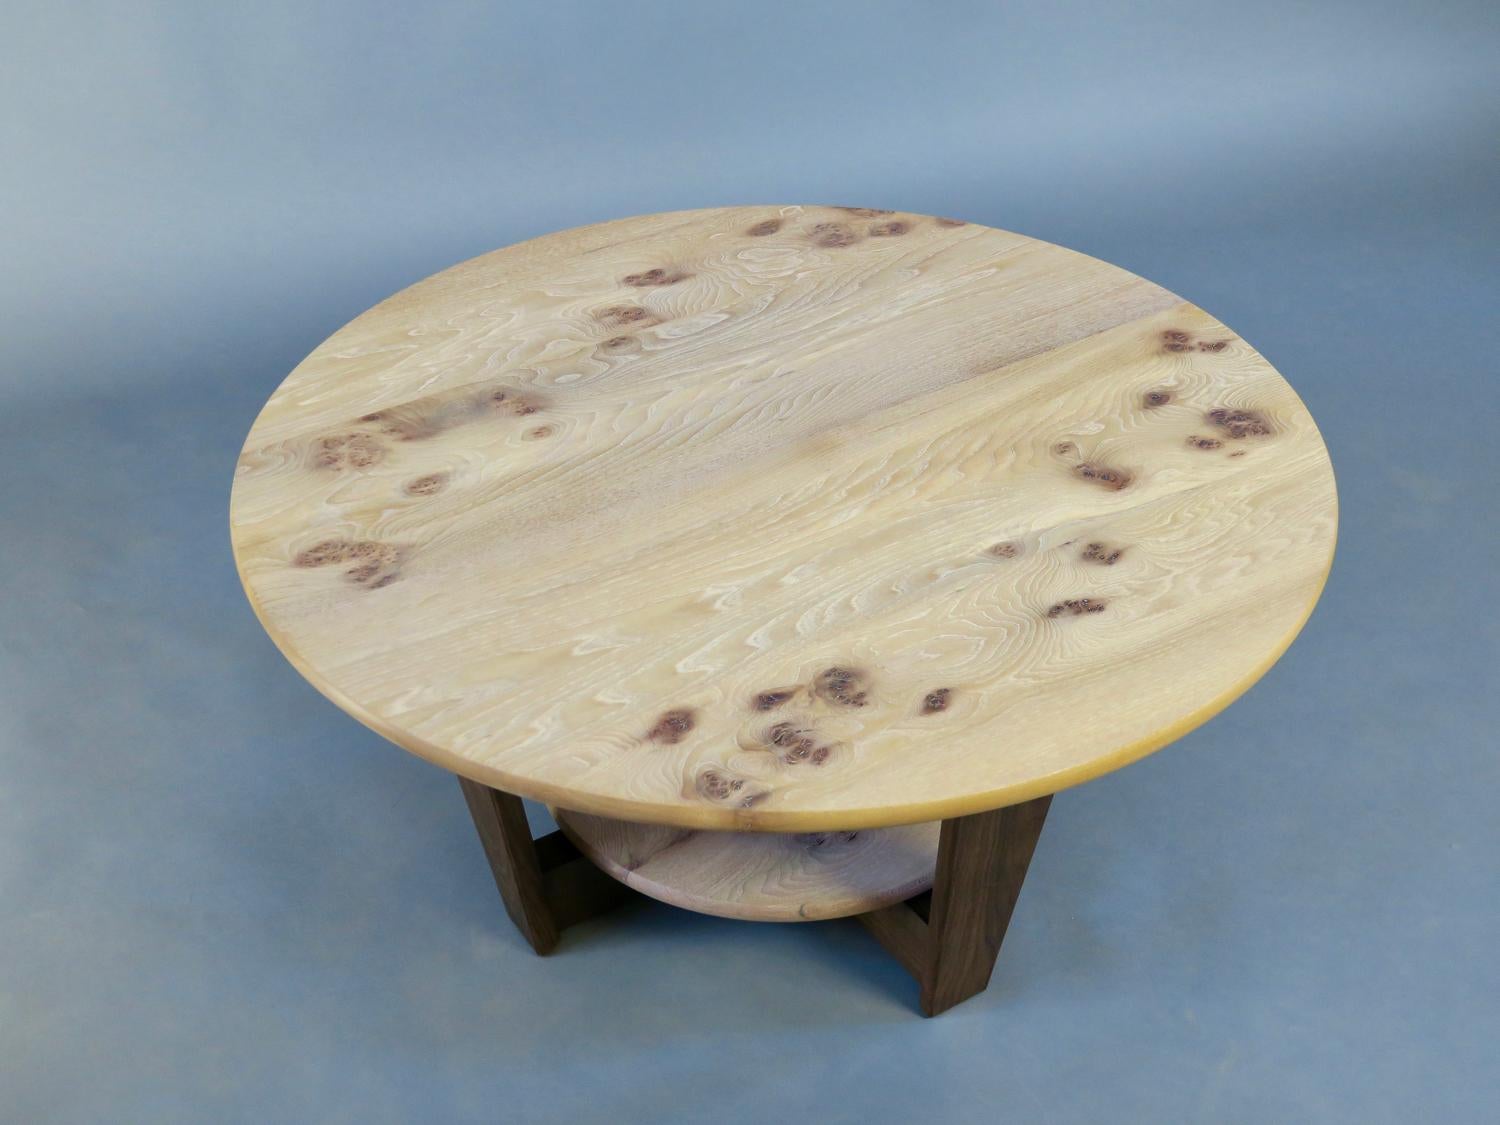 Woodwork Cerused Elm and Walnut Coffee Table, Thomas Throop/ Black Creek Designs-In Stock For Sale